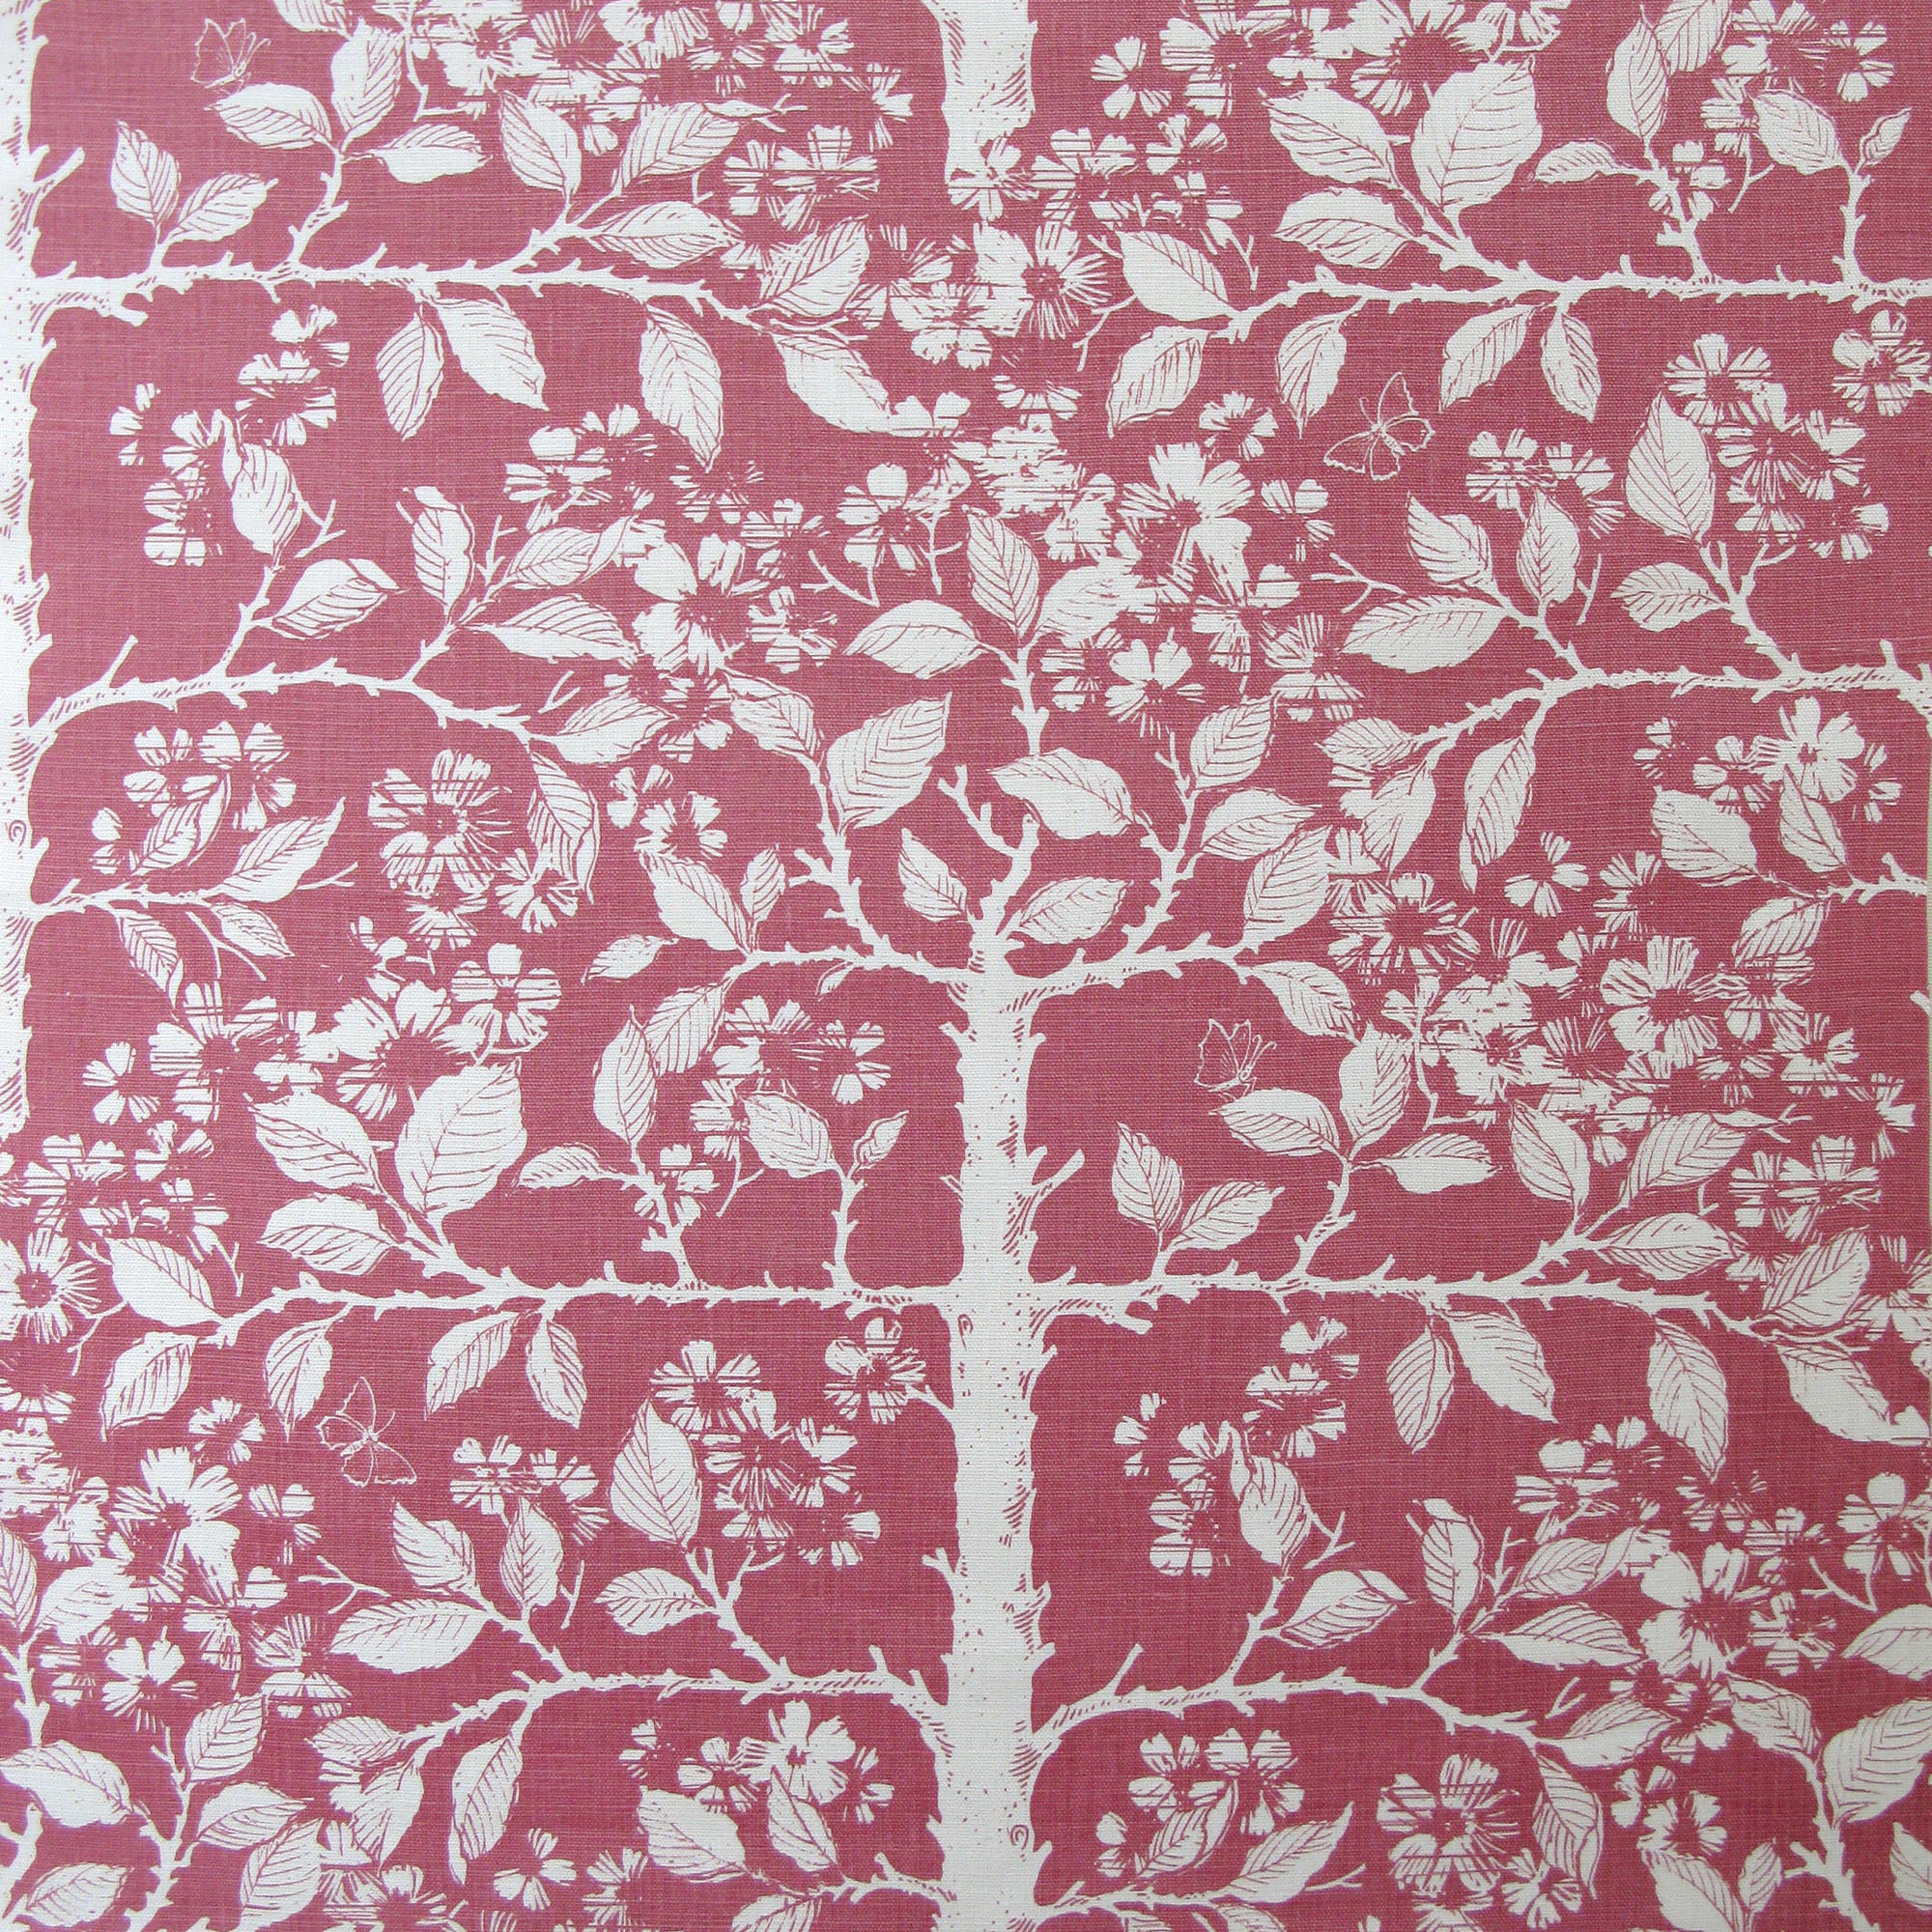 Detail of fabric in a large-scale tree and leaf print in cream on a pink field.